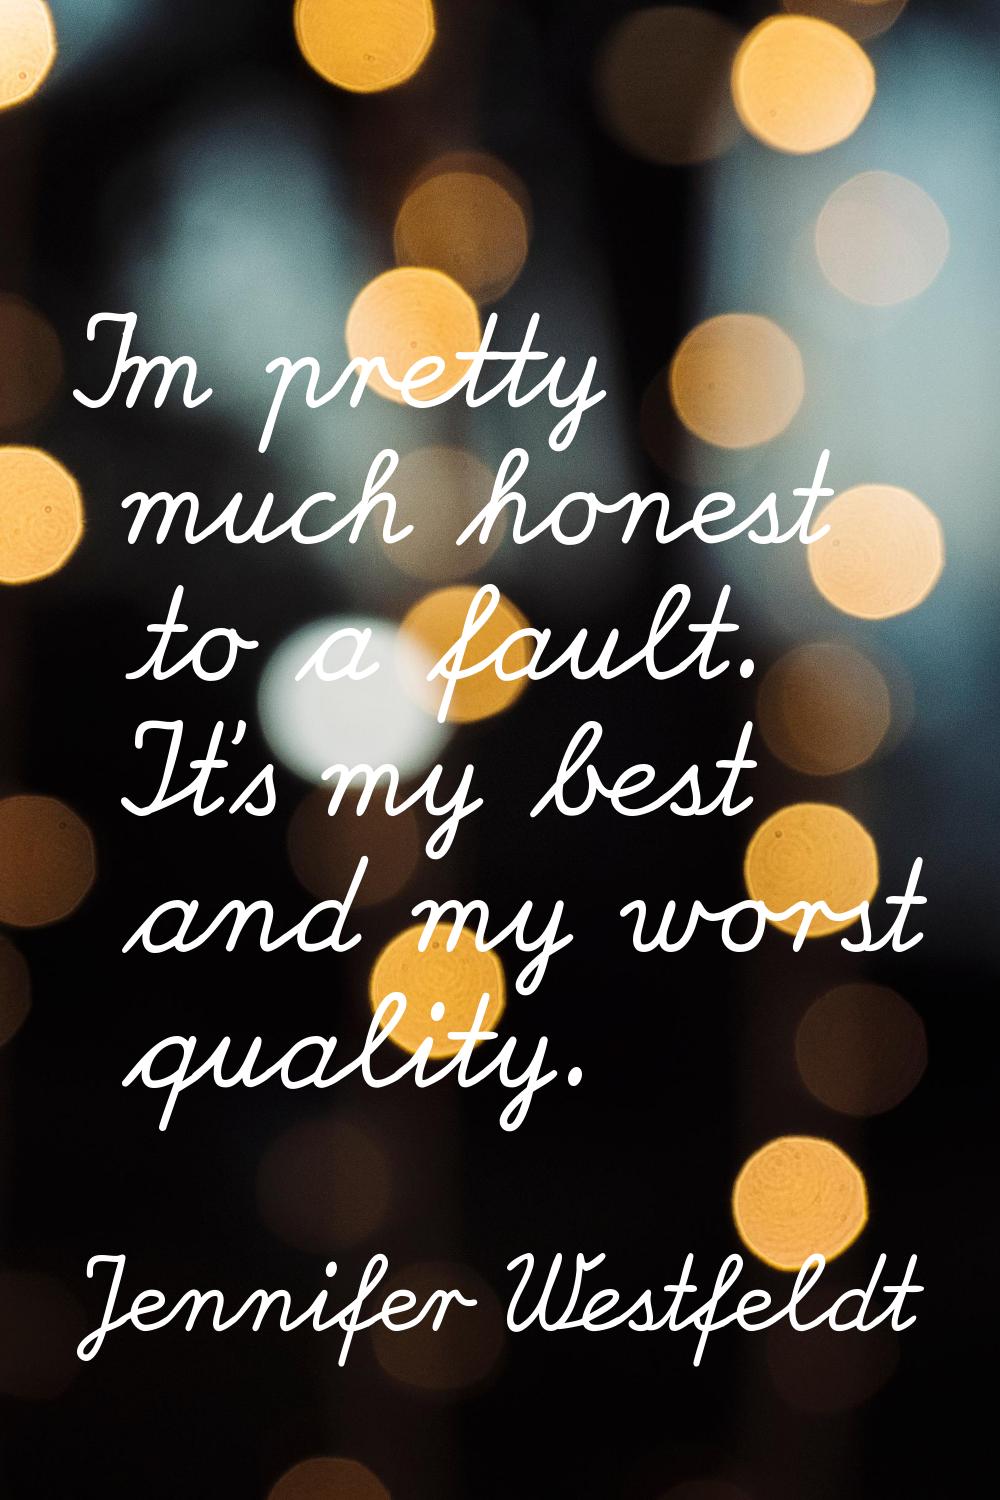 I'm pretty much honest to a fault. It's my best and my worst quality.